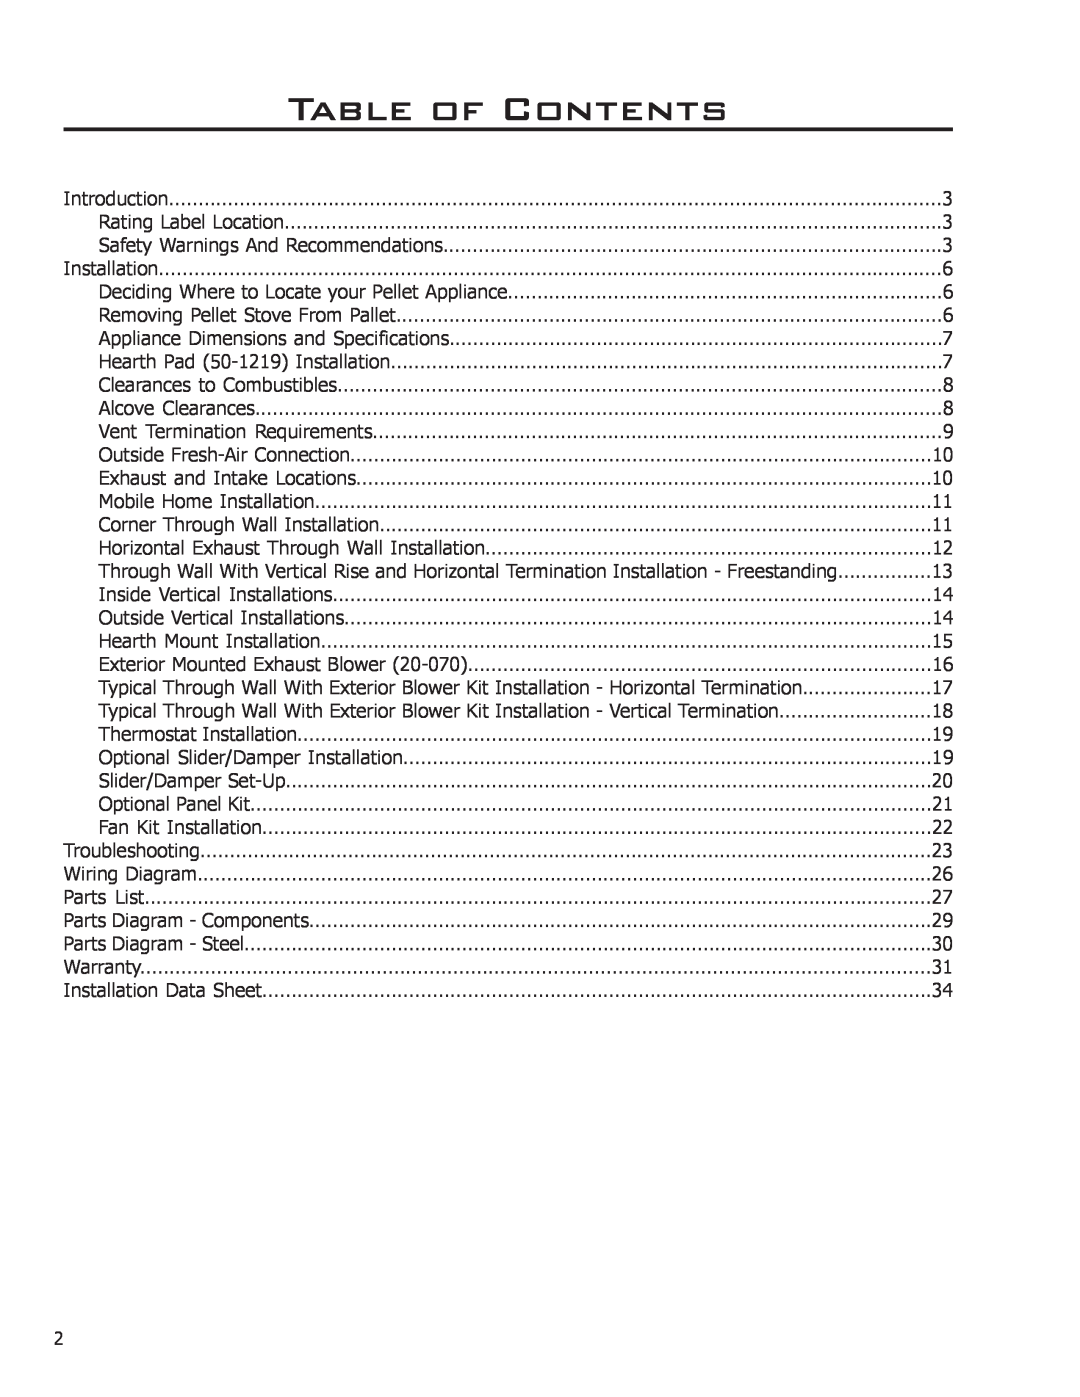 Enviro C-11150 technical manual Table of Contents 